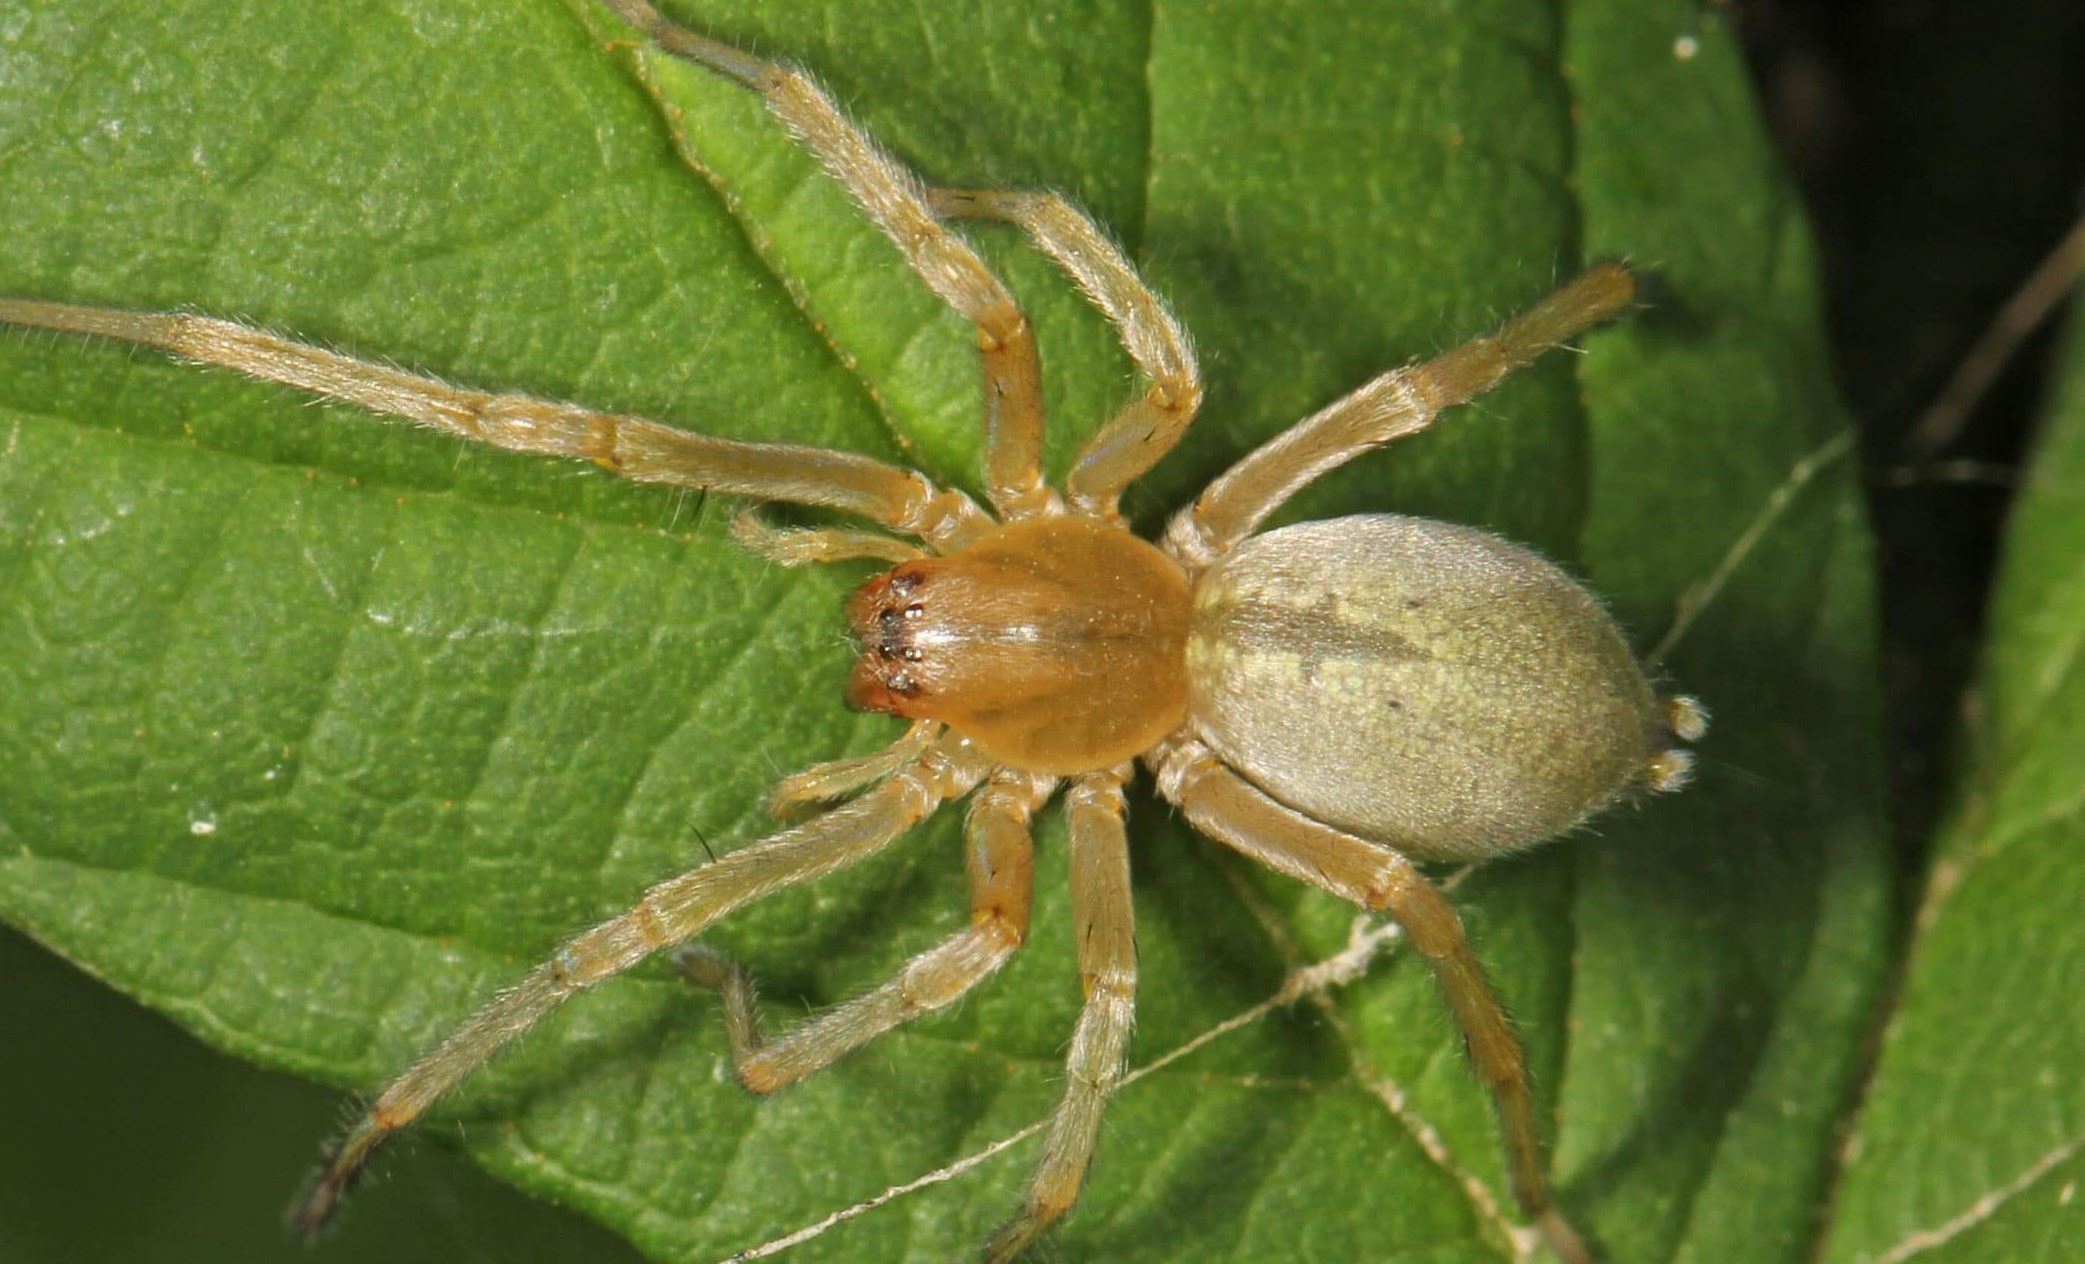 8-fascinating-facts-about-yellow-sac-spider